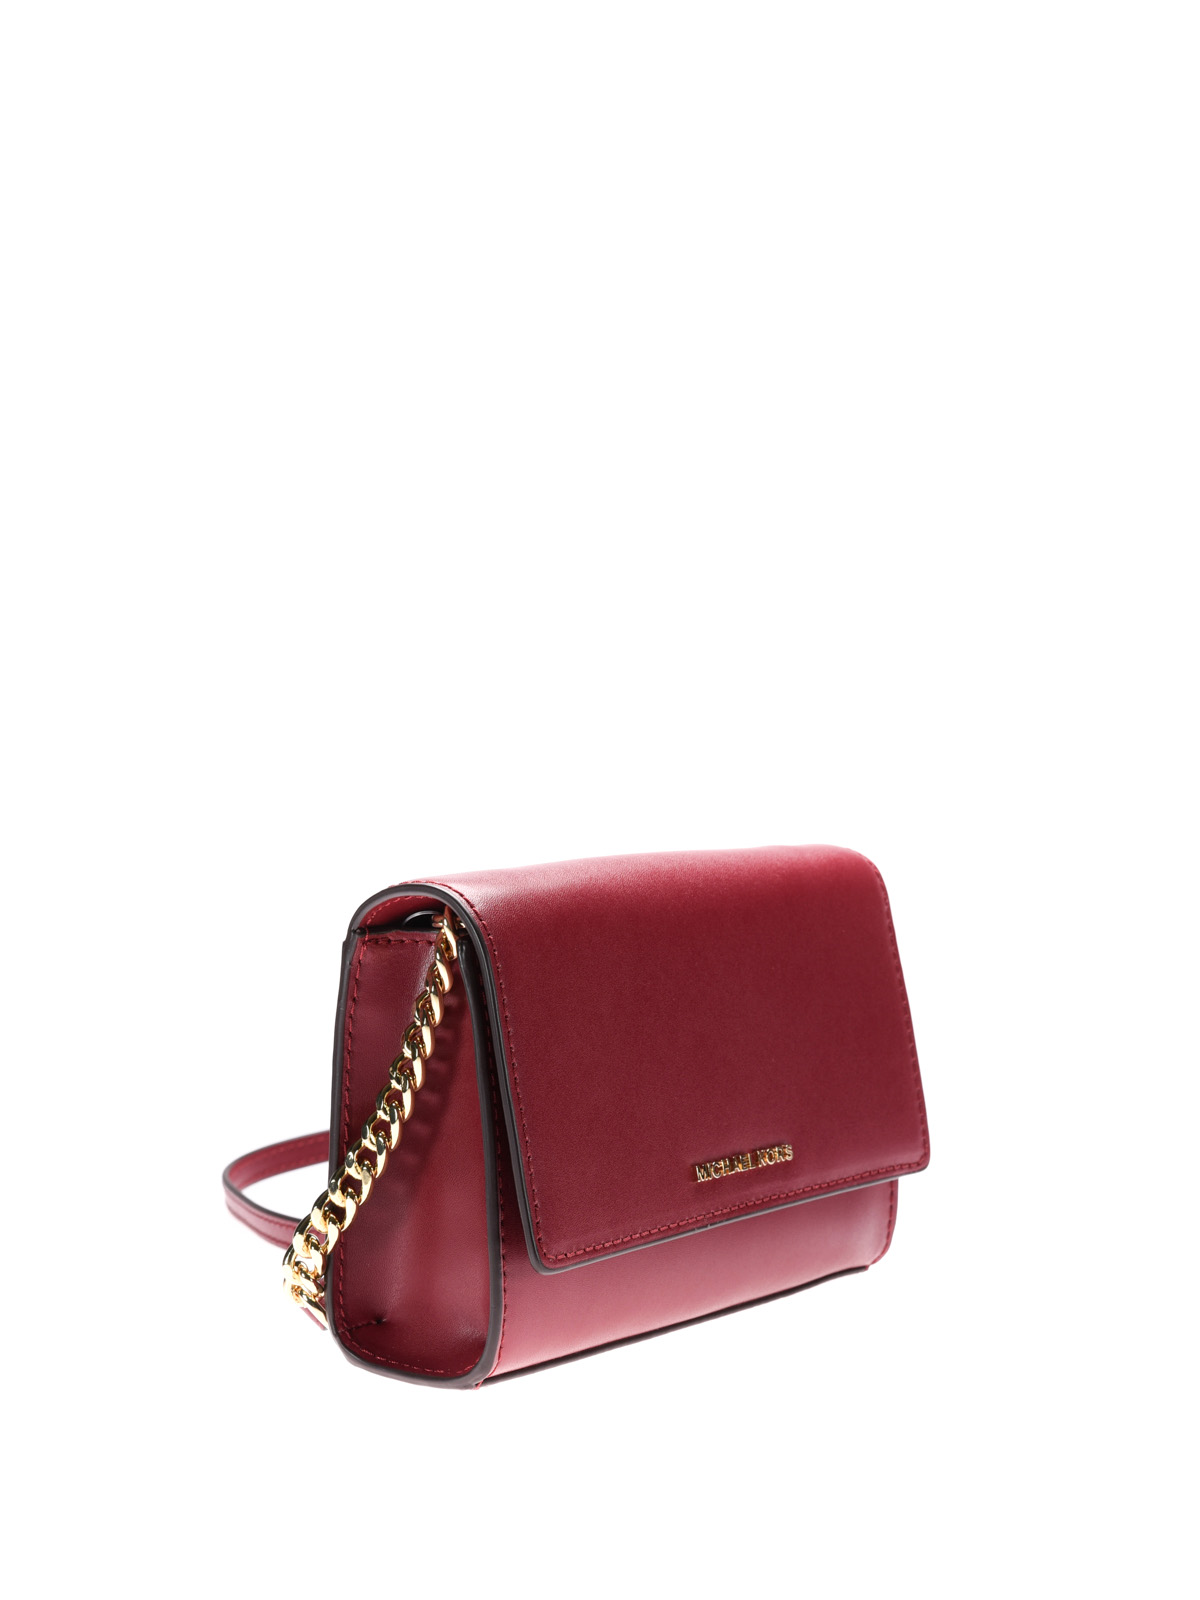 gennembore ansvar Spaceship Clutches Michael Kors - Foldover red leather clutch - 30F7GR0C2LL666